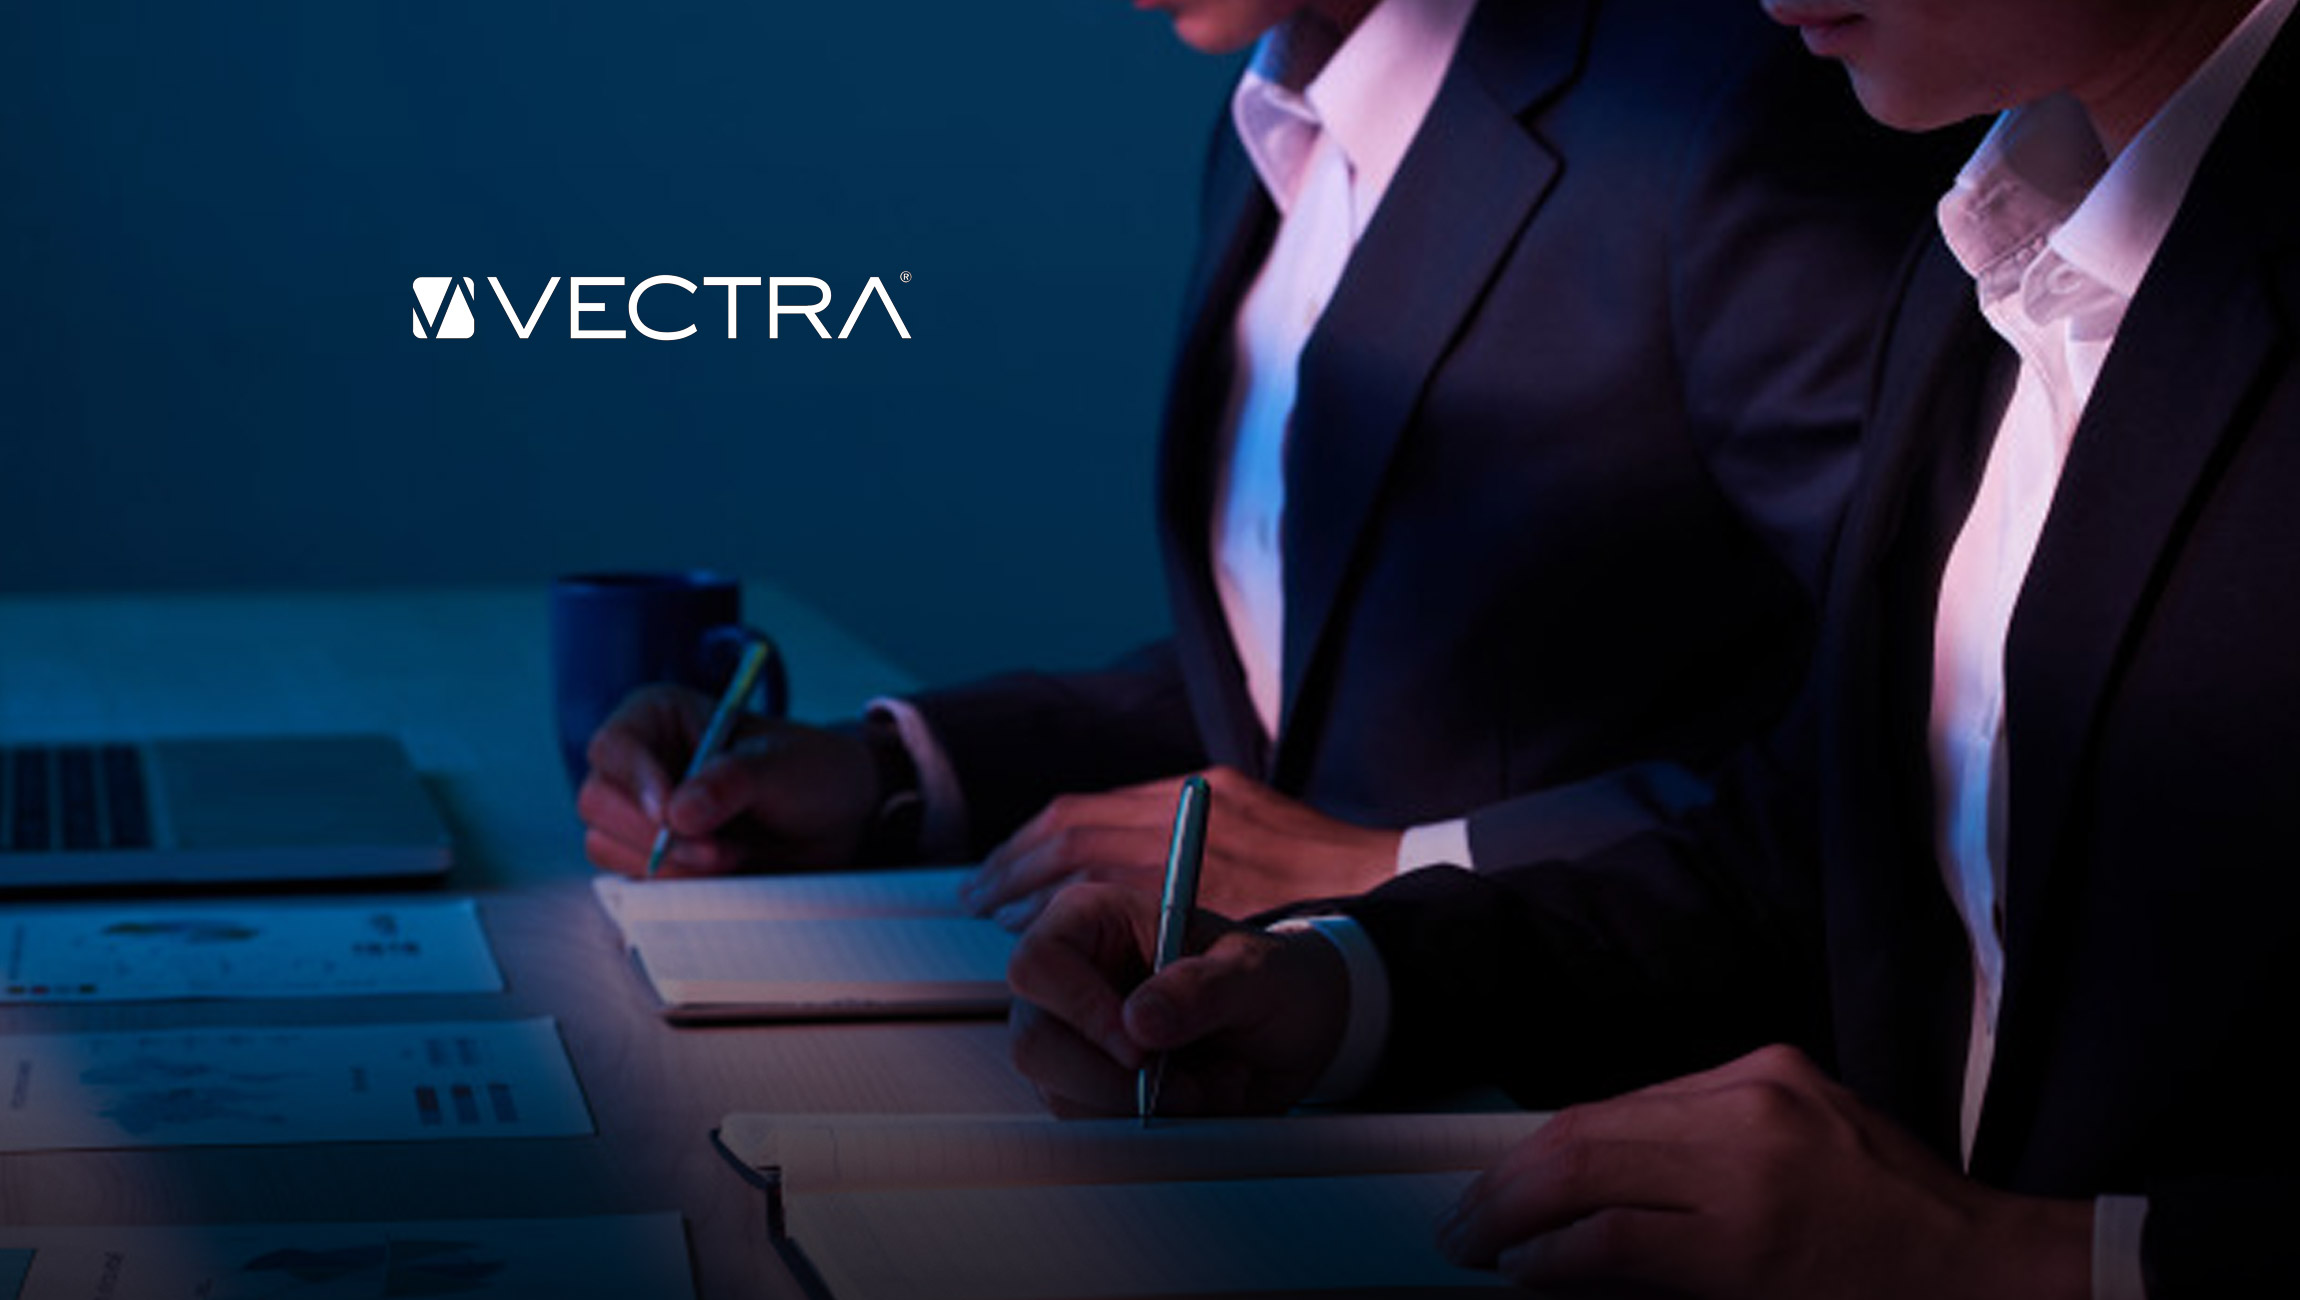 Vectra Expands Global Footprint Through Enriched Channel Partner Program, Training and Growth Into Commercial Market